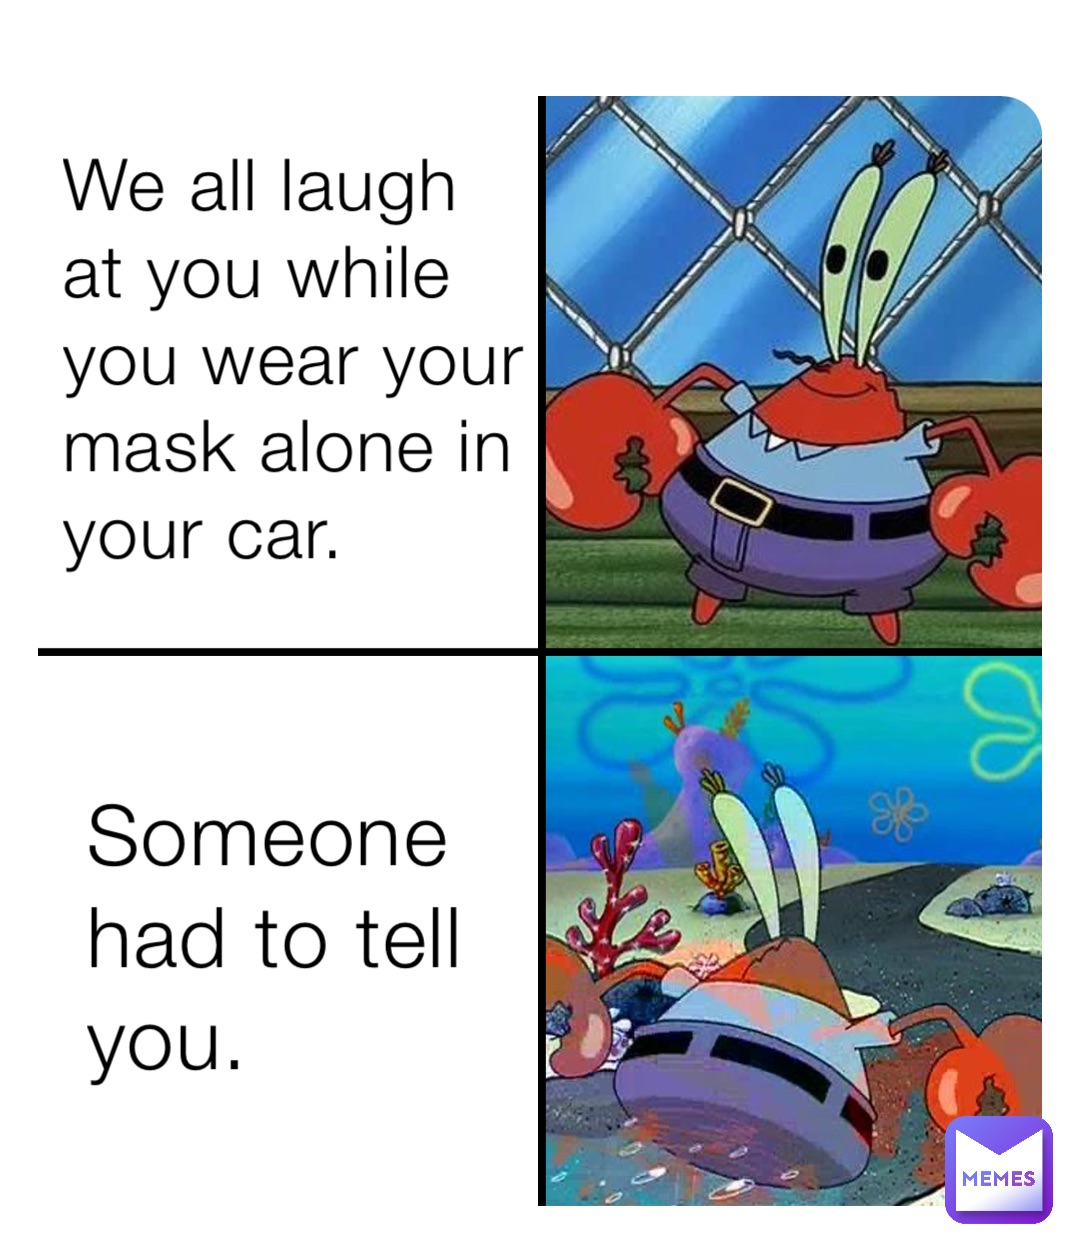 We all laugh at you while you wear your mask alone in your car. Someone had to tell you.